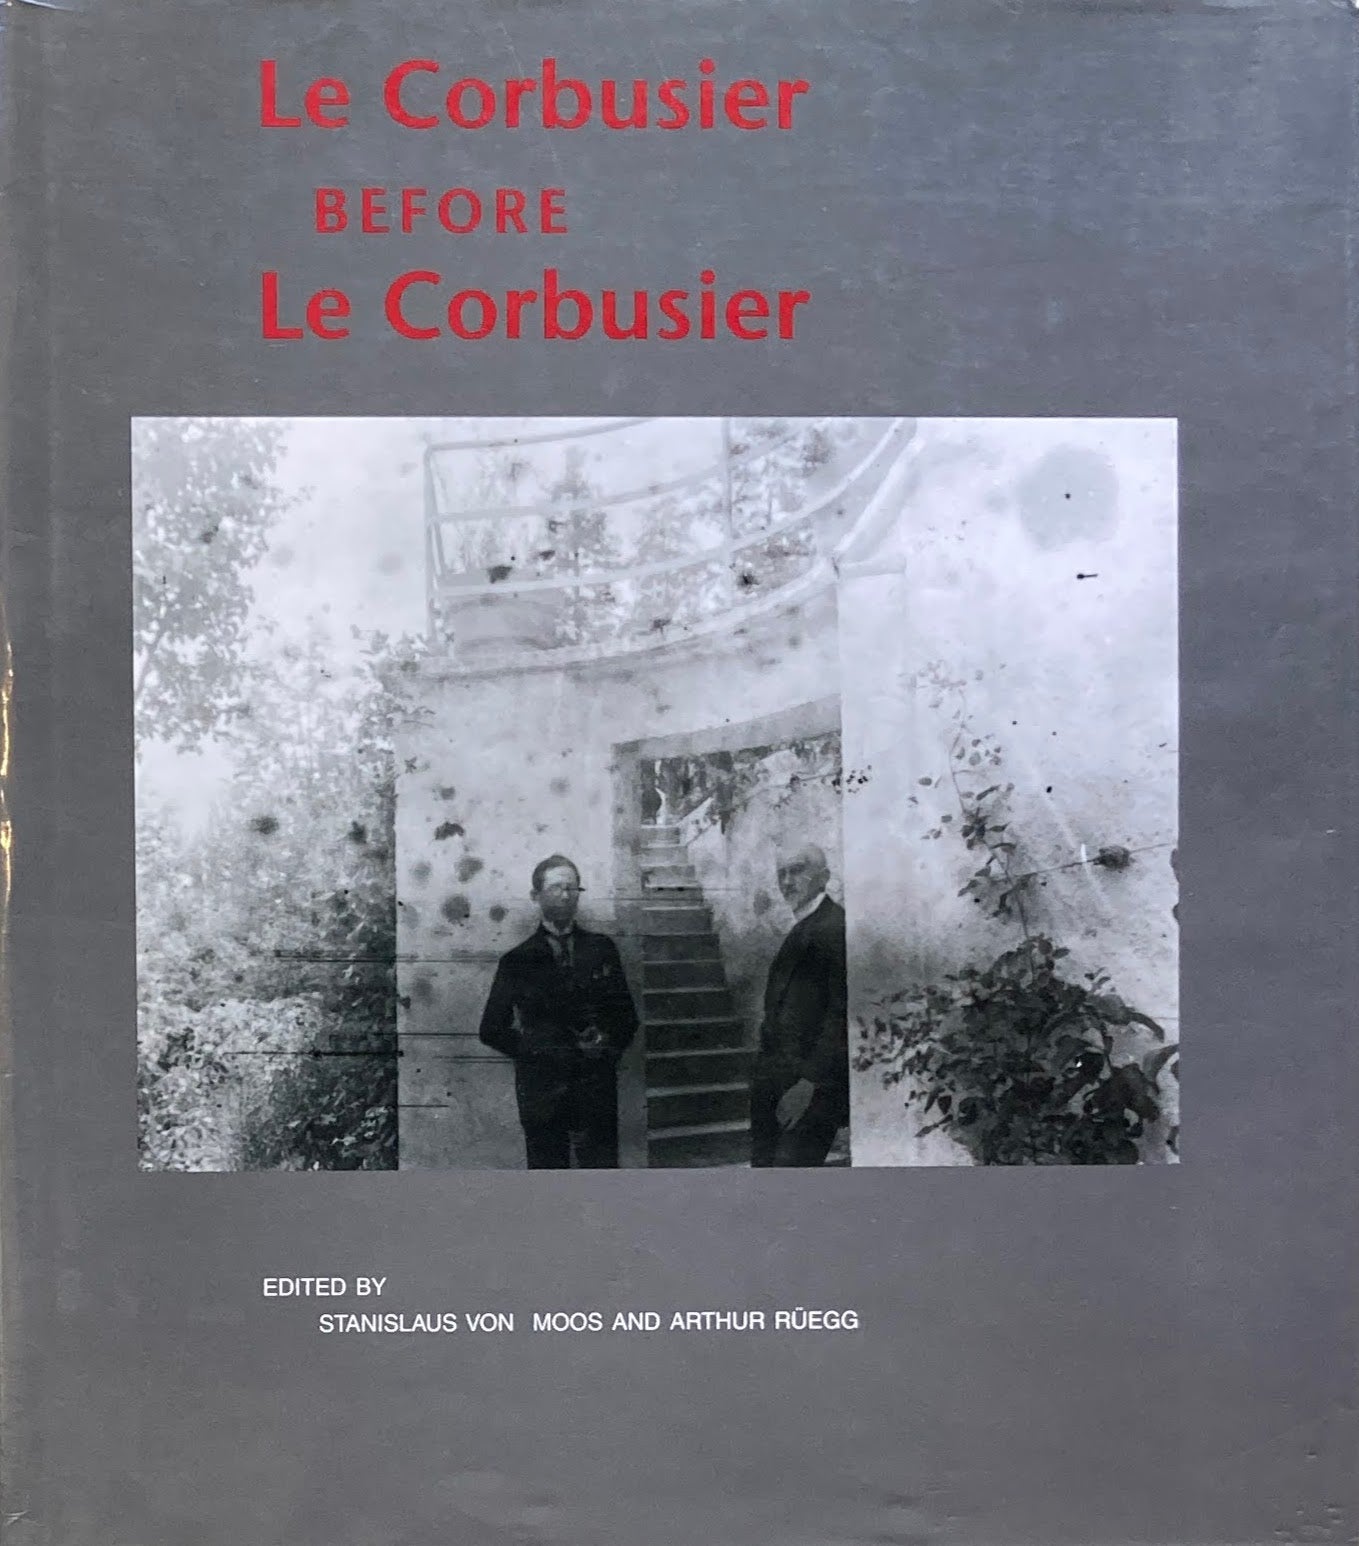 Le Corbusier Before Le Corbusier　Stanislaus von Moos and Arthur Ruegg　ル・コルビュジエ